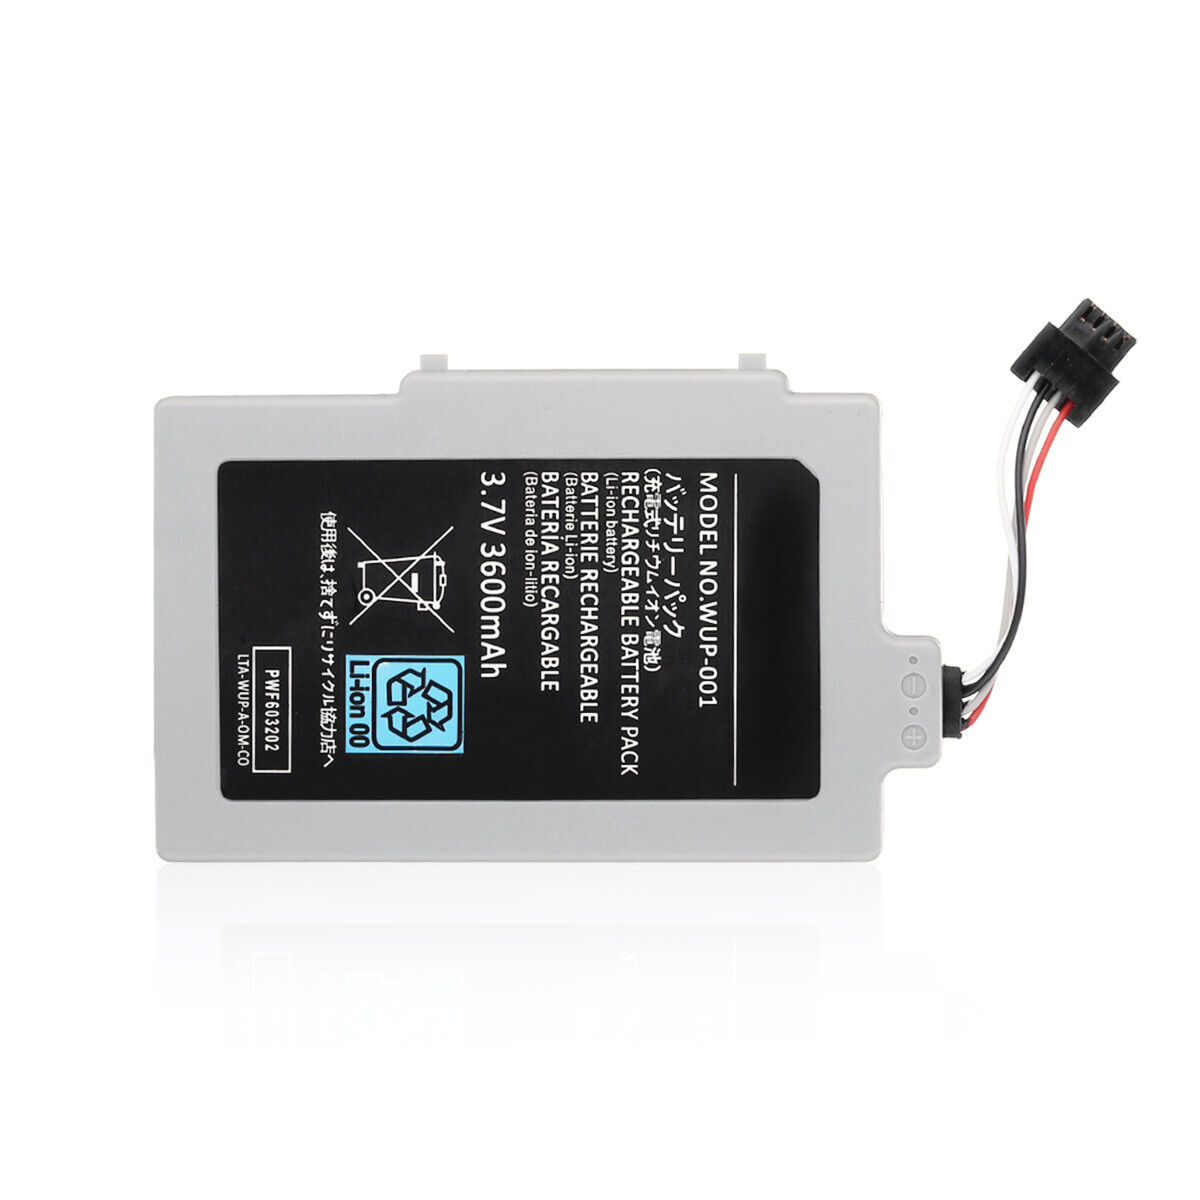 Rechargeable Extended Battery Pack For Nintendo Wii U Gamepad 3600mAh 3.7V OEM Unbranded - фотография #9